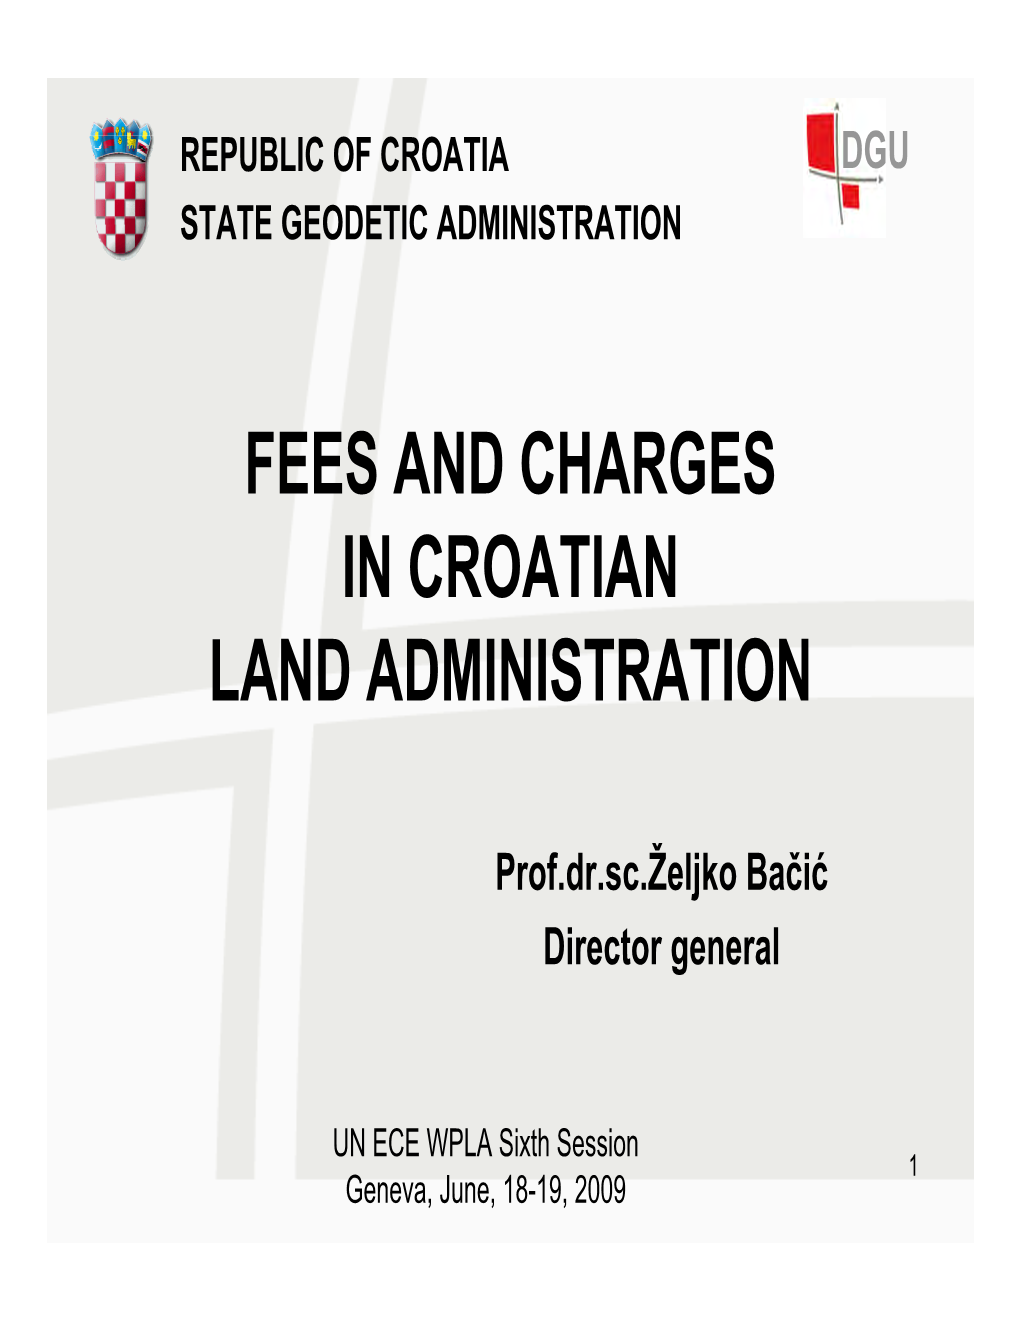 Fees and Charges in Croatian Land Administration